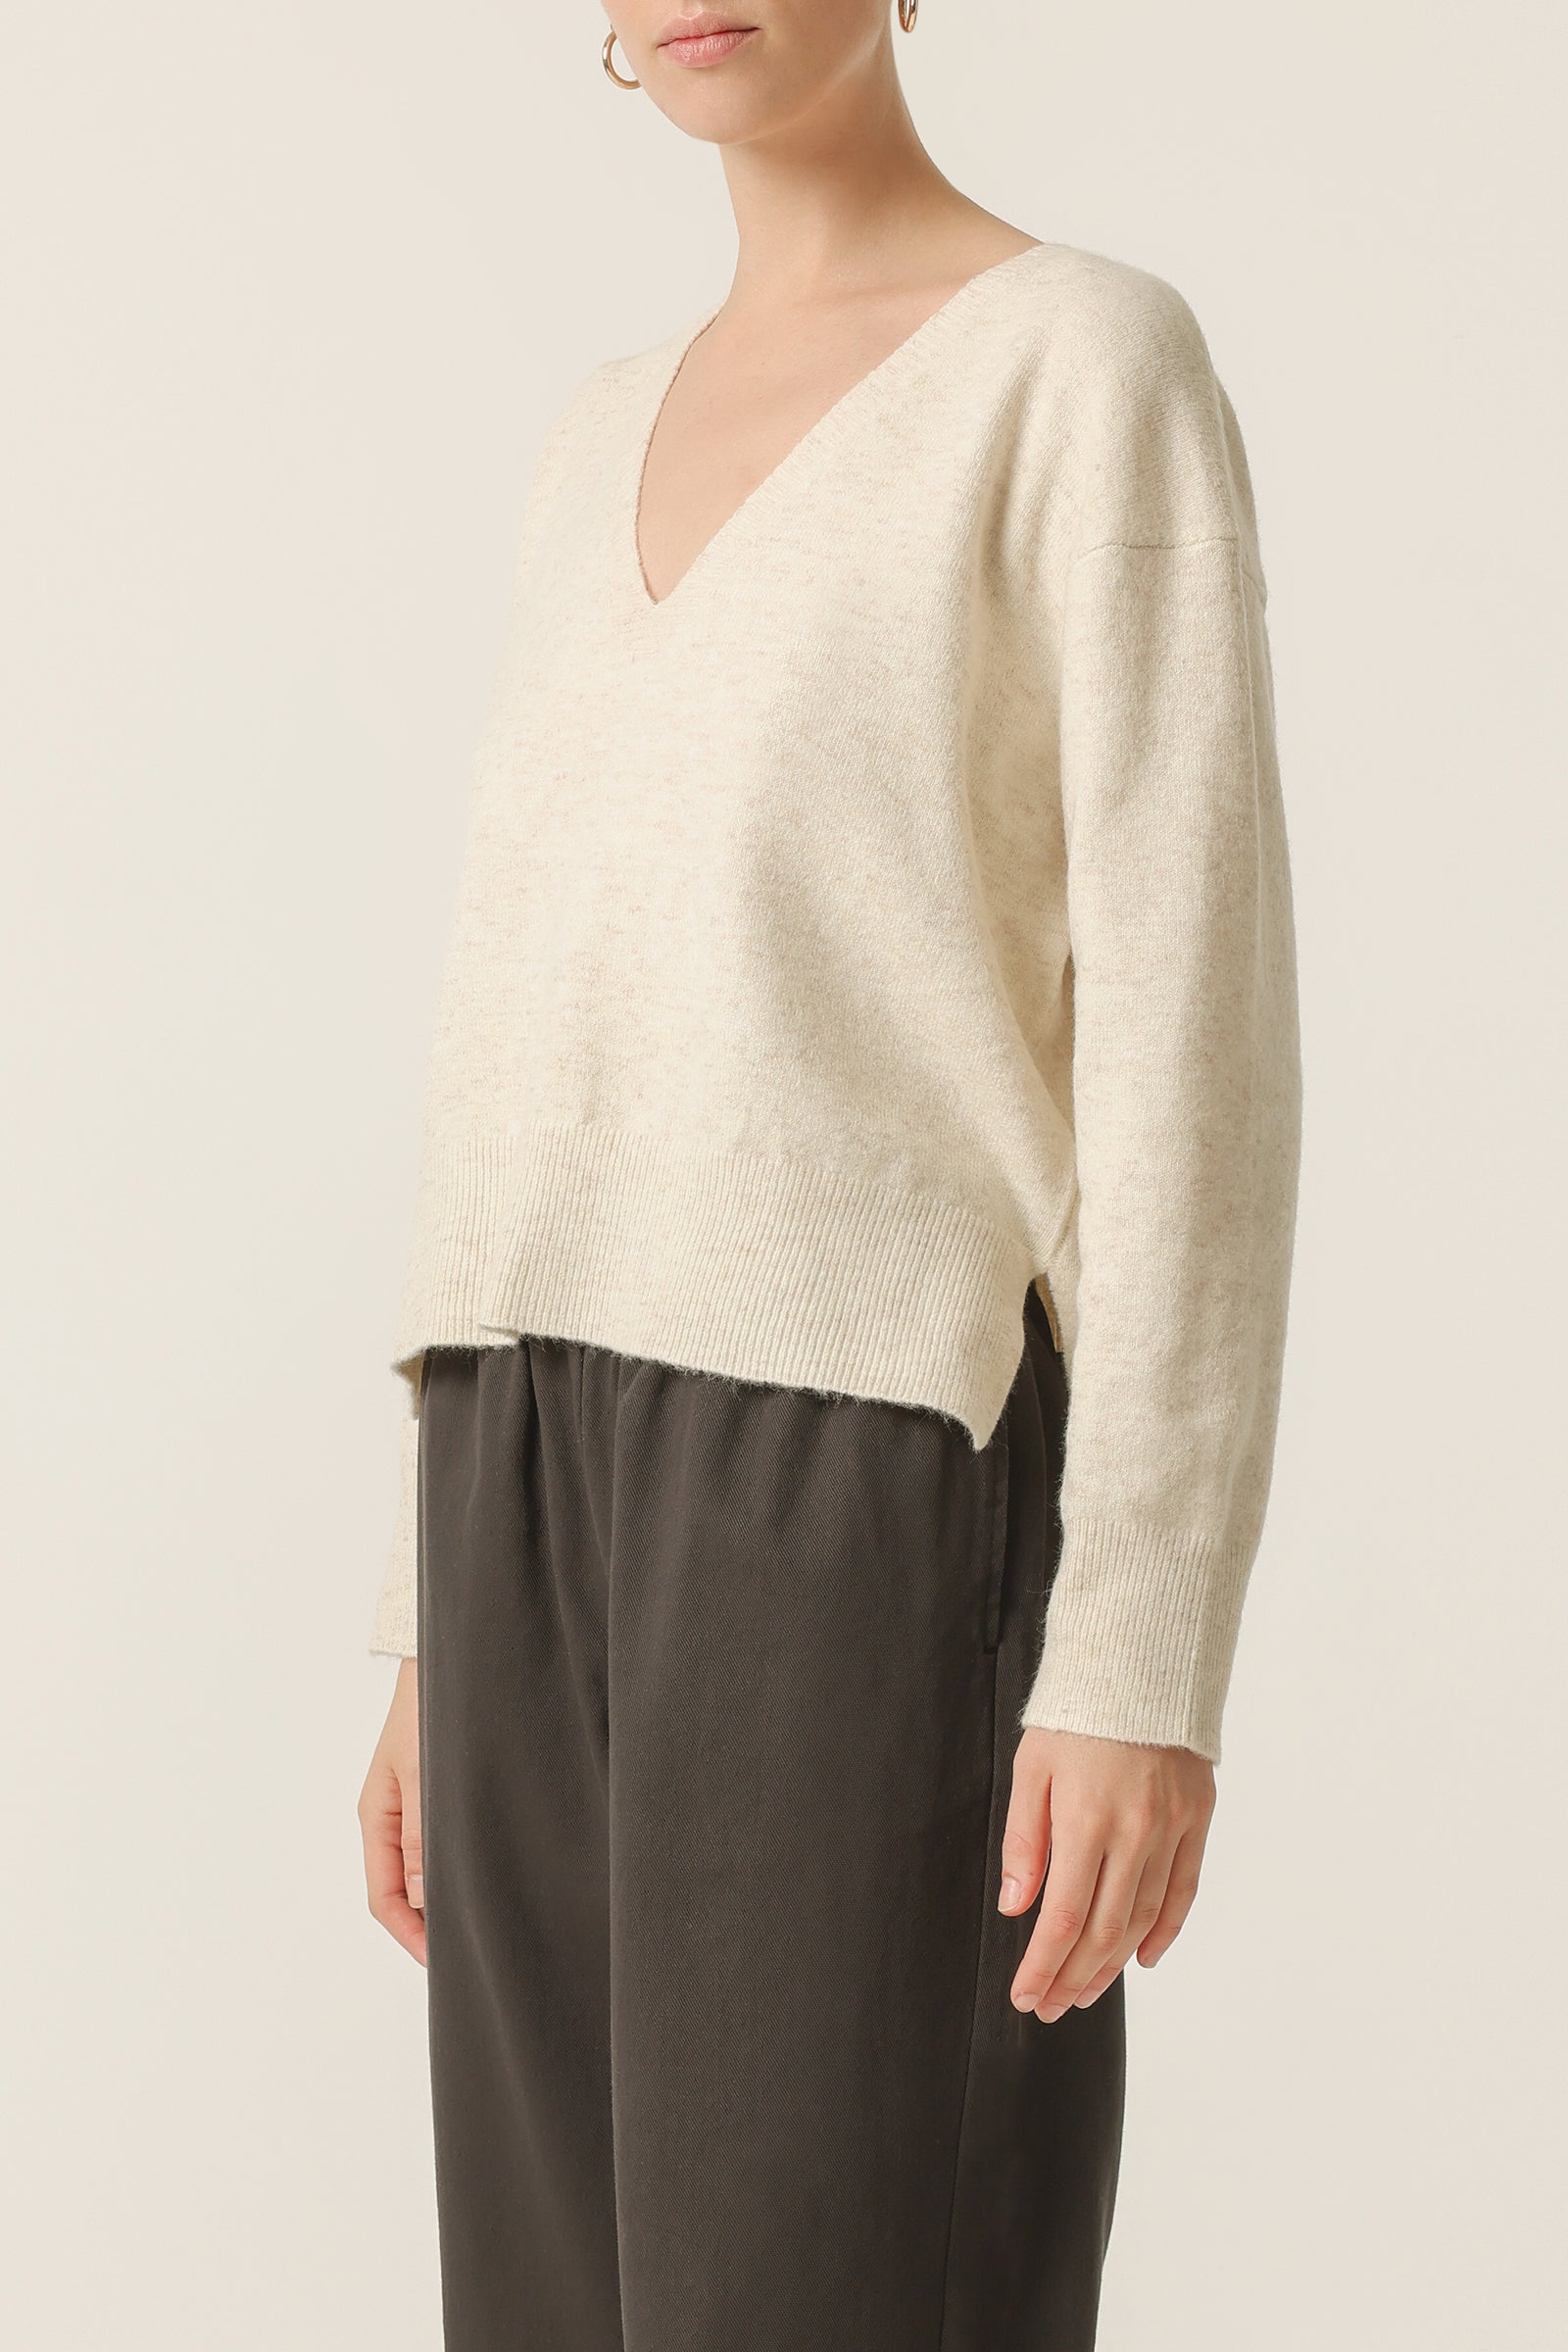 Nude Lucy Laice Knit in White Cloud